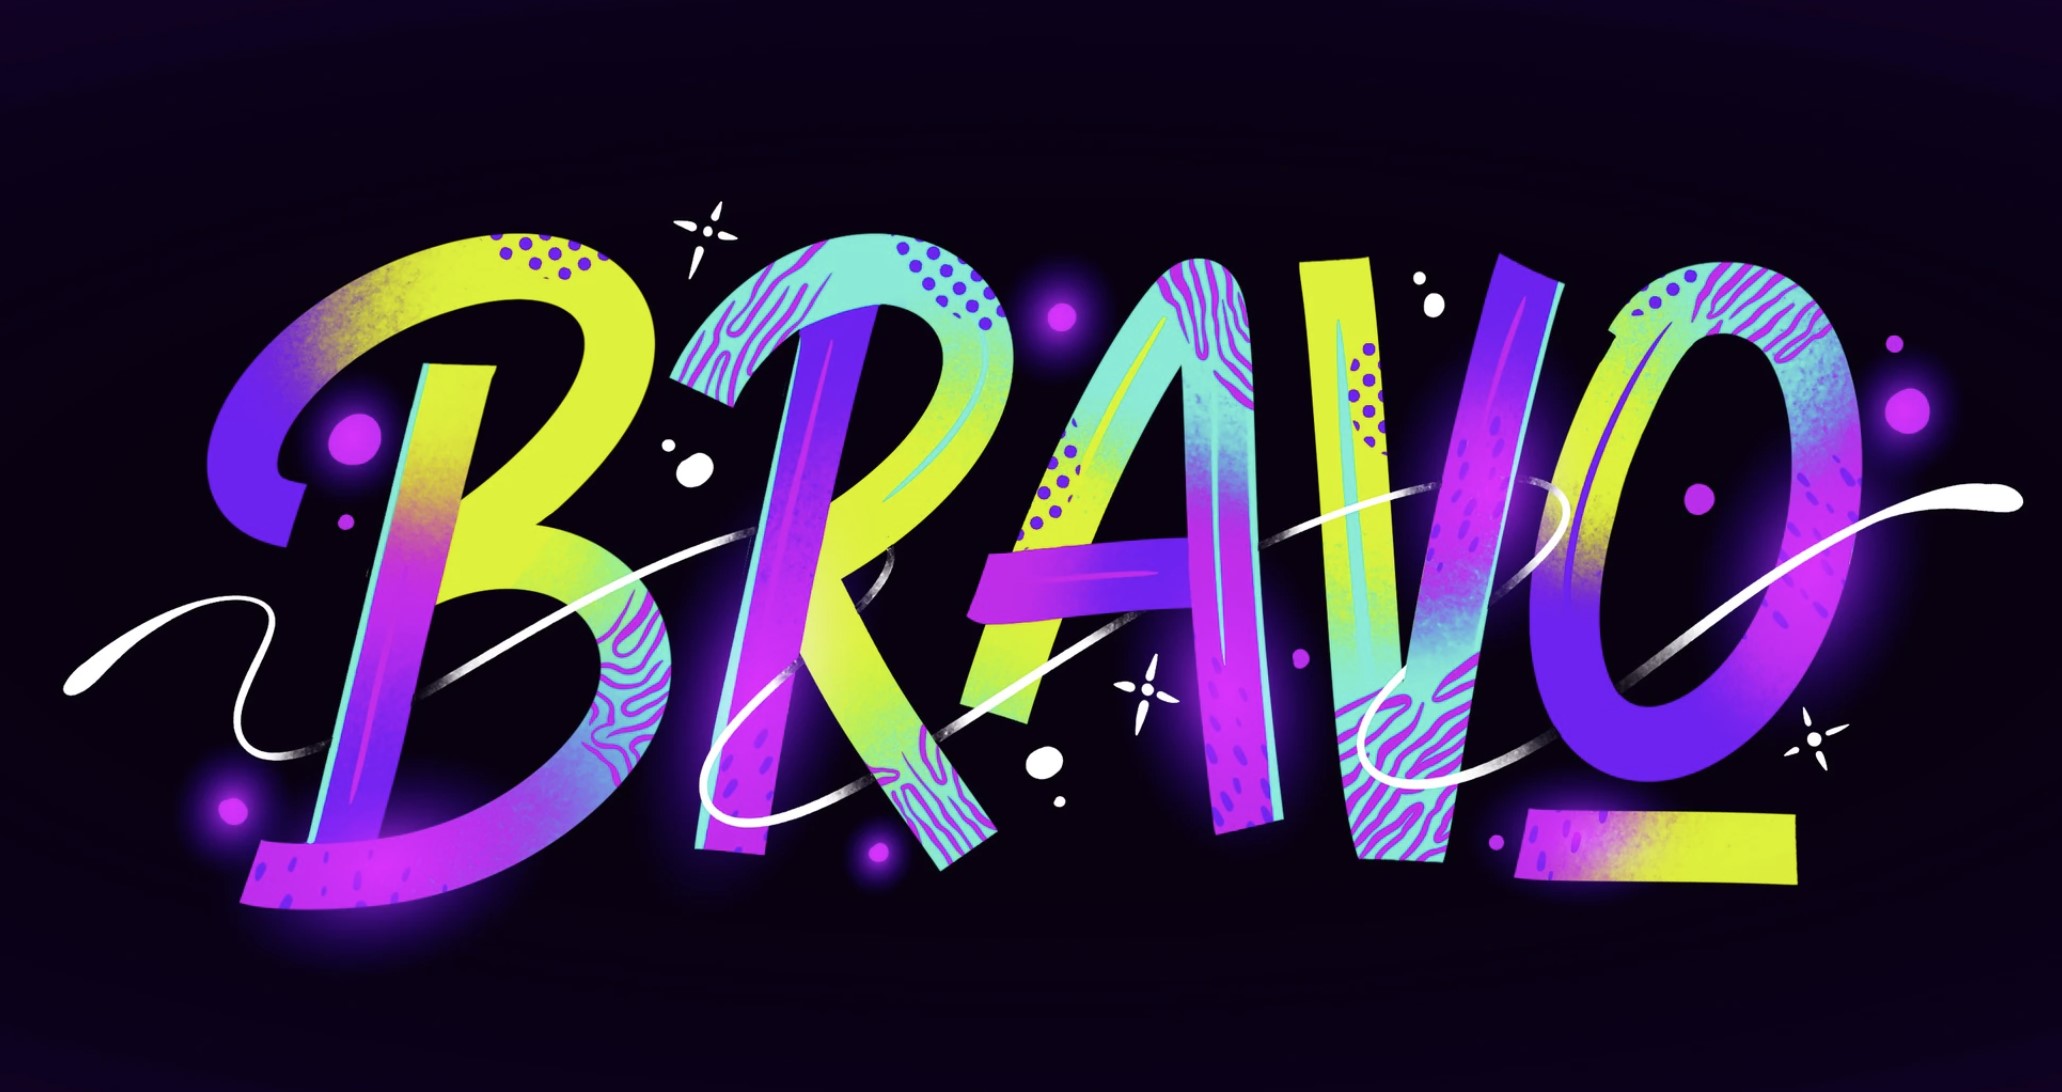 25 Hand-drawn type & lettering designs for free